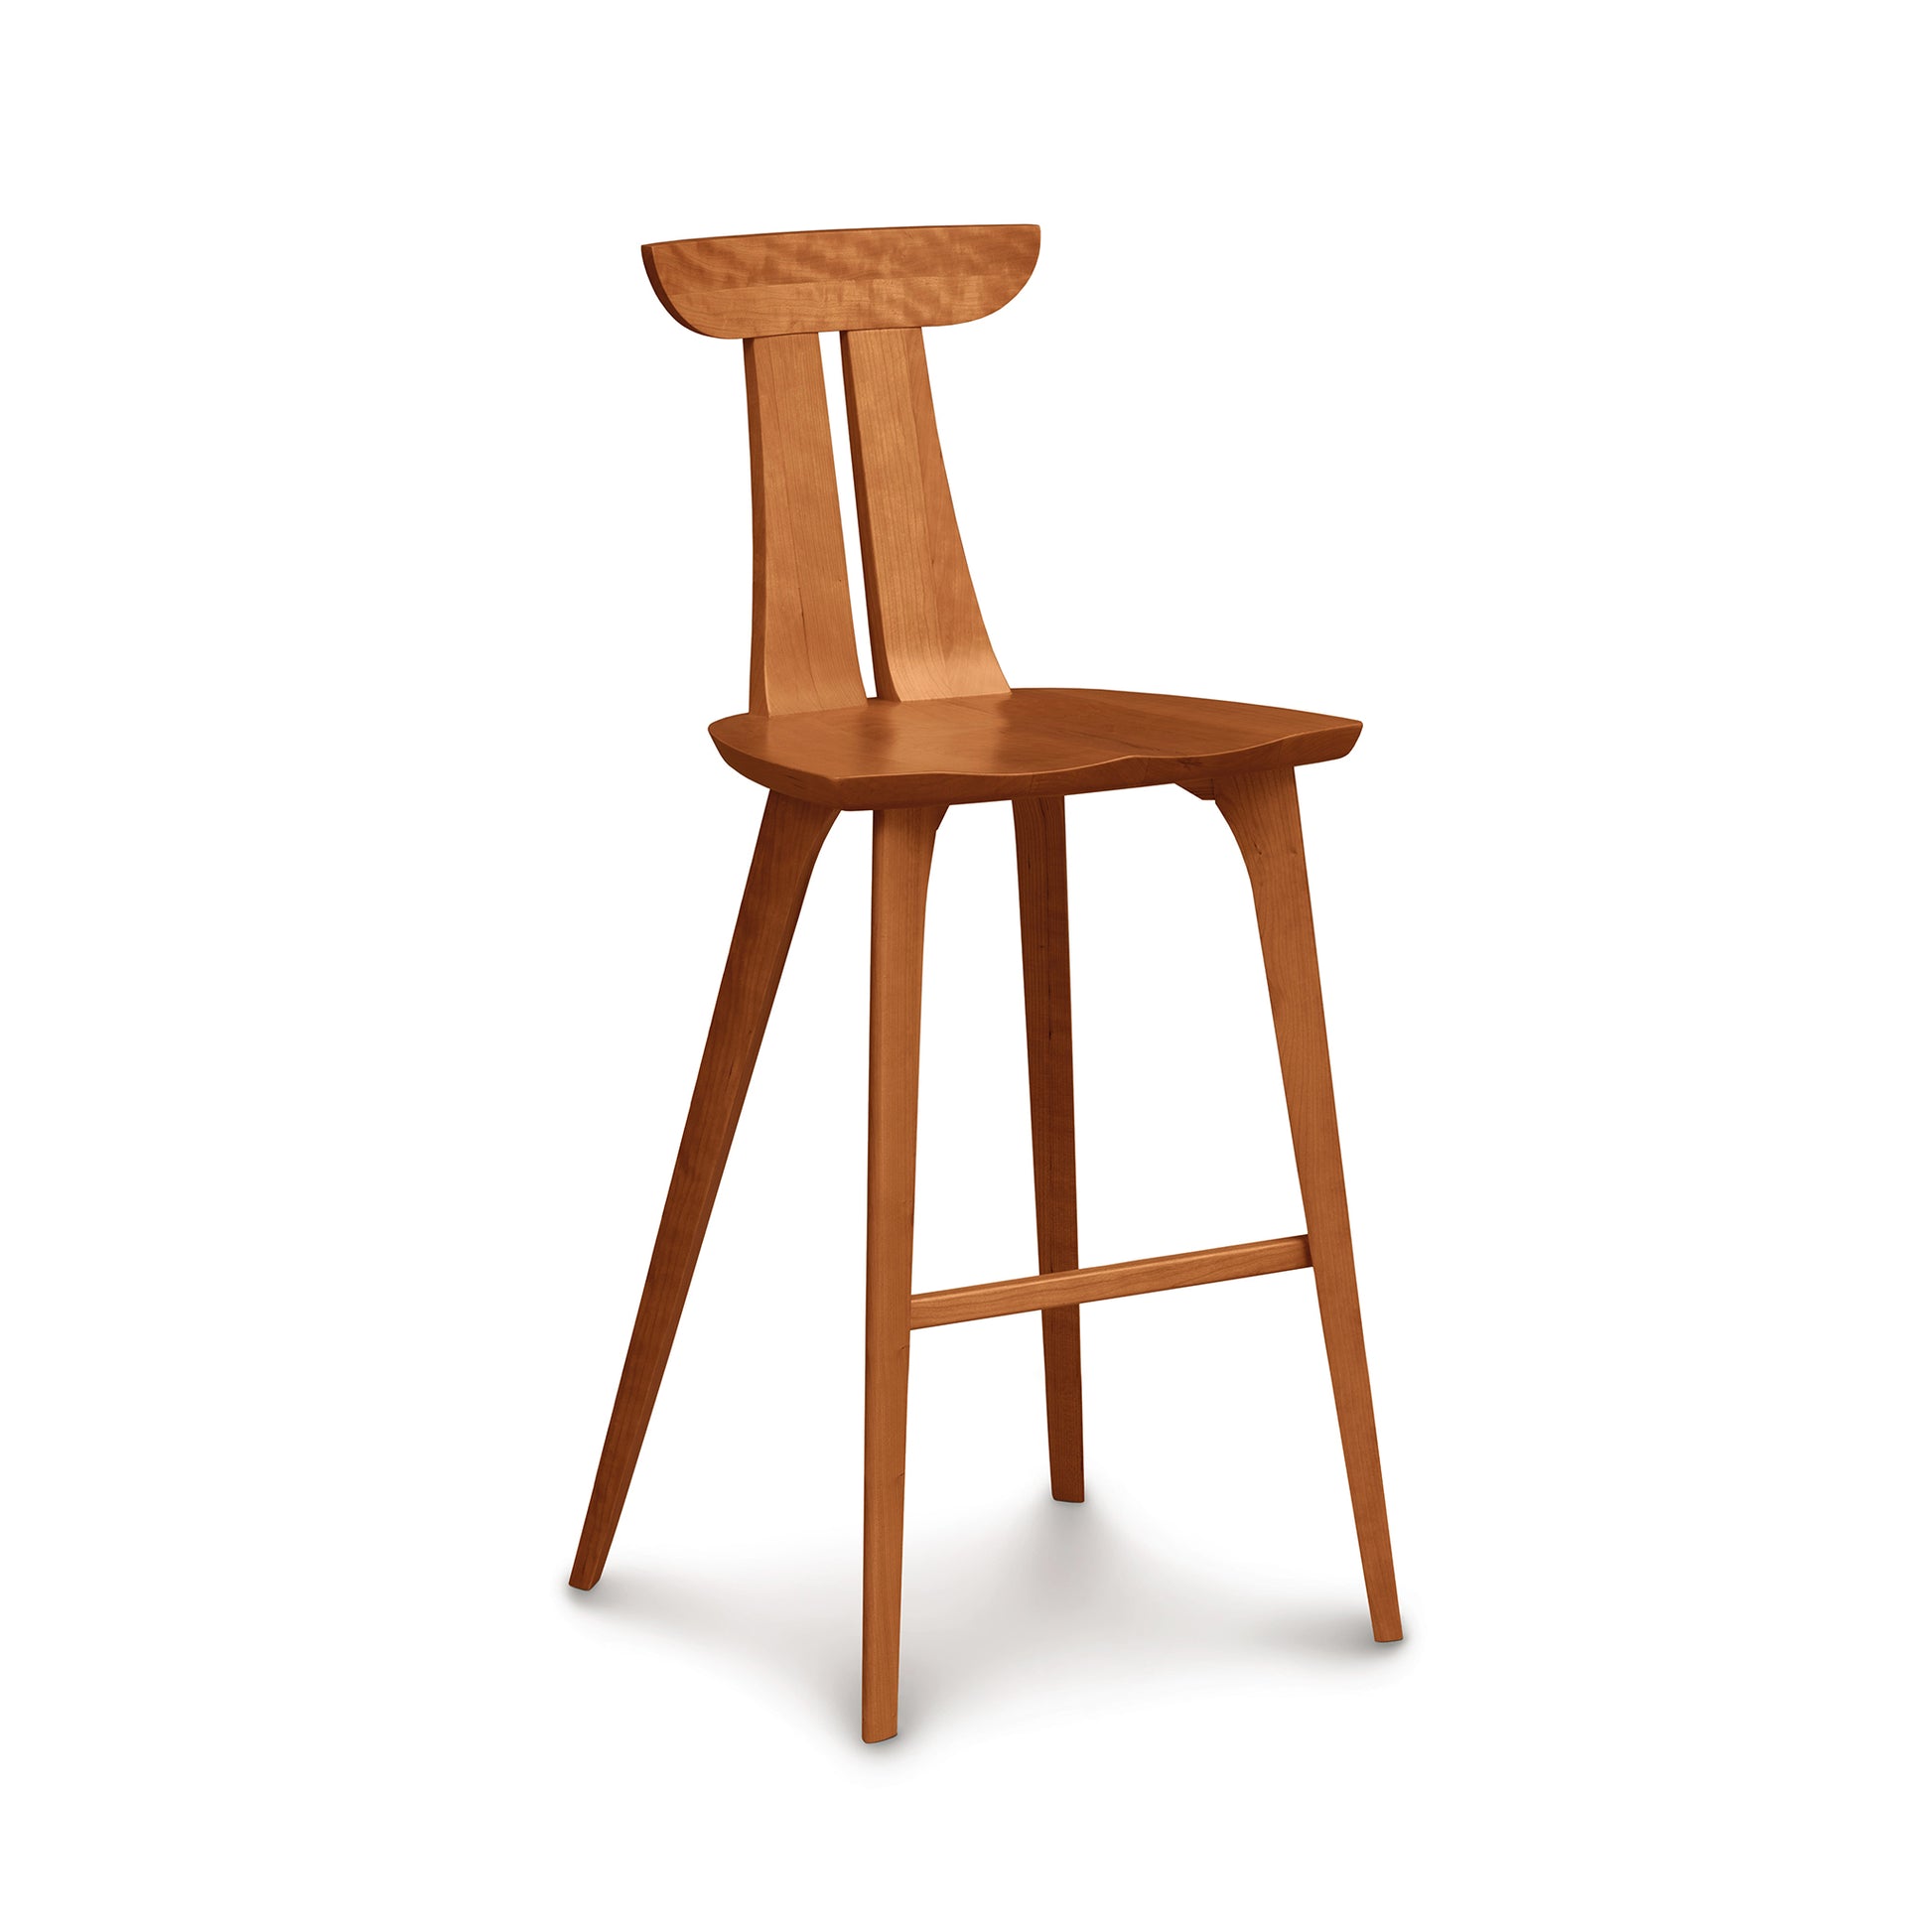 A solid Estelle Bar Stool by Copeland Furniture, made of American hardwood, isolated against a white background.